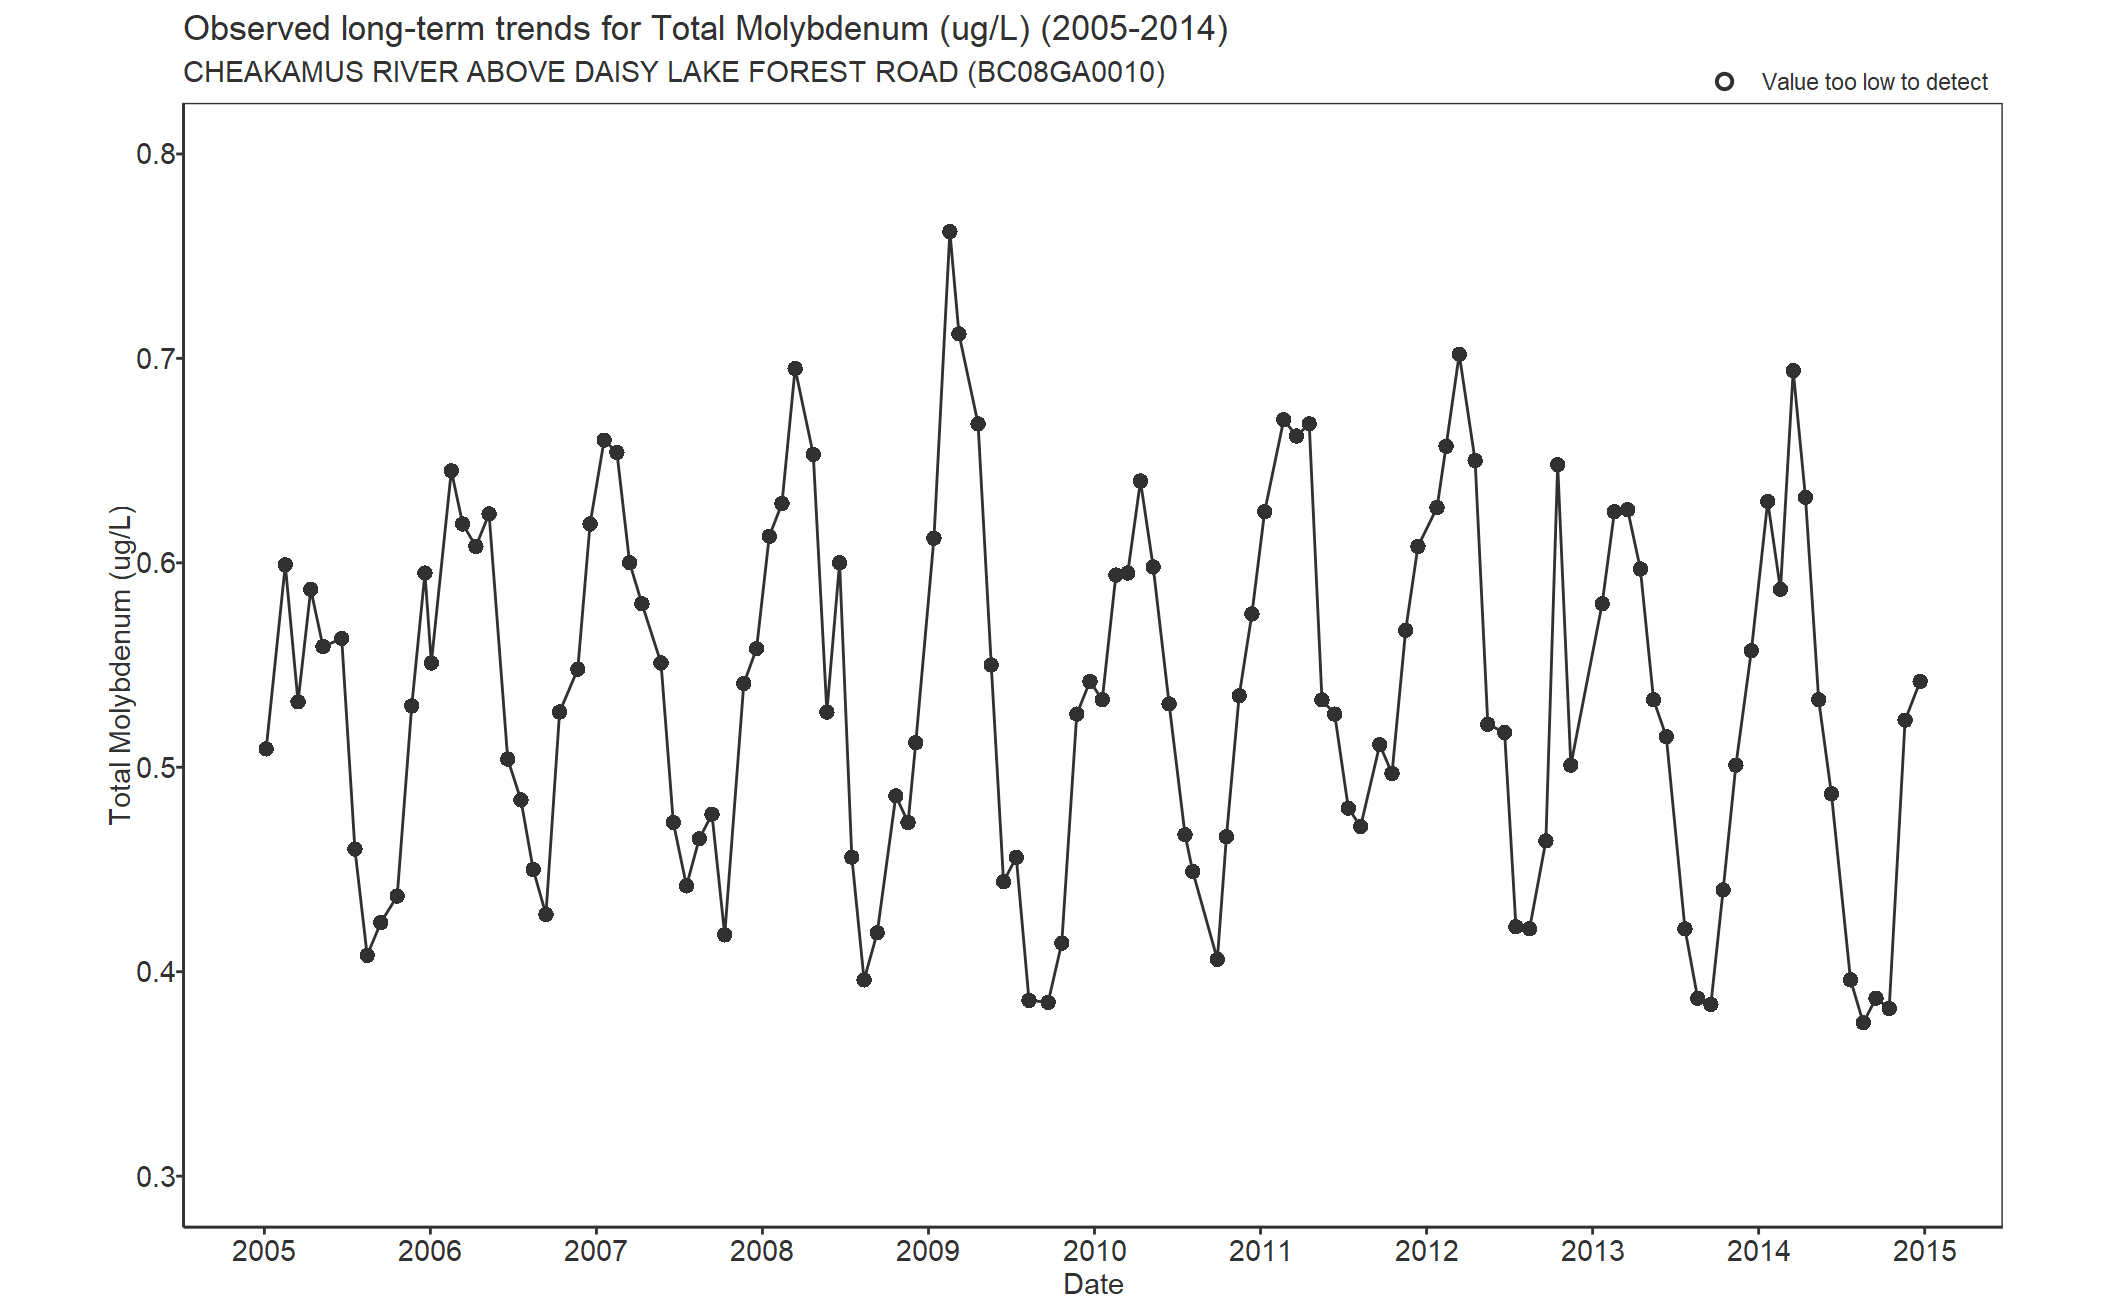 Observed long-term trends for Total Molybdenum (2005-2014)